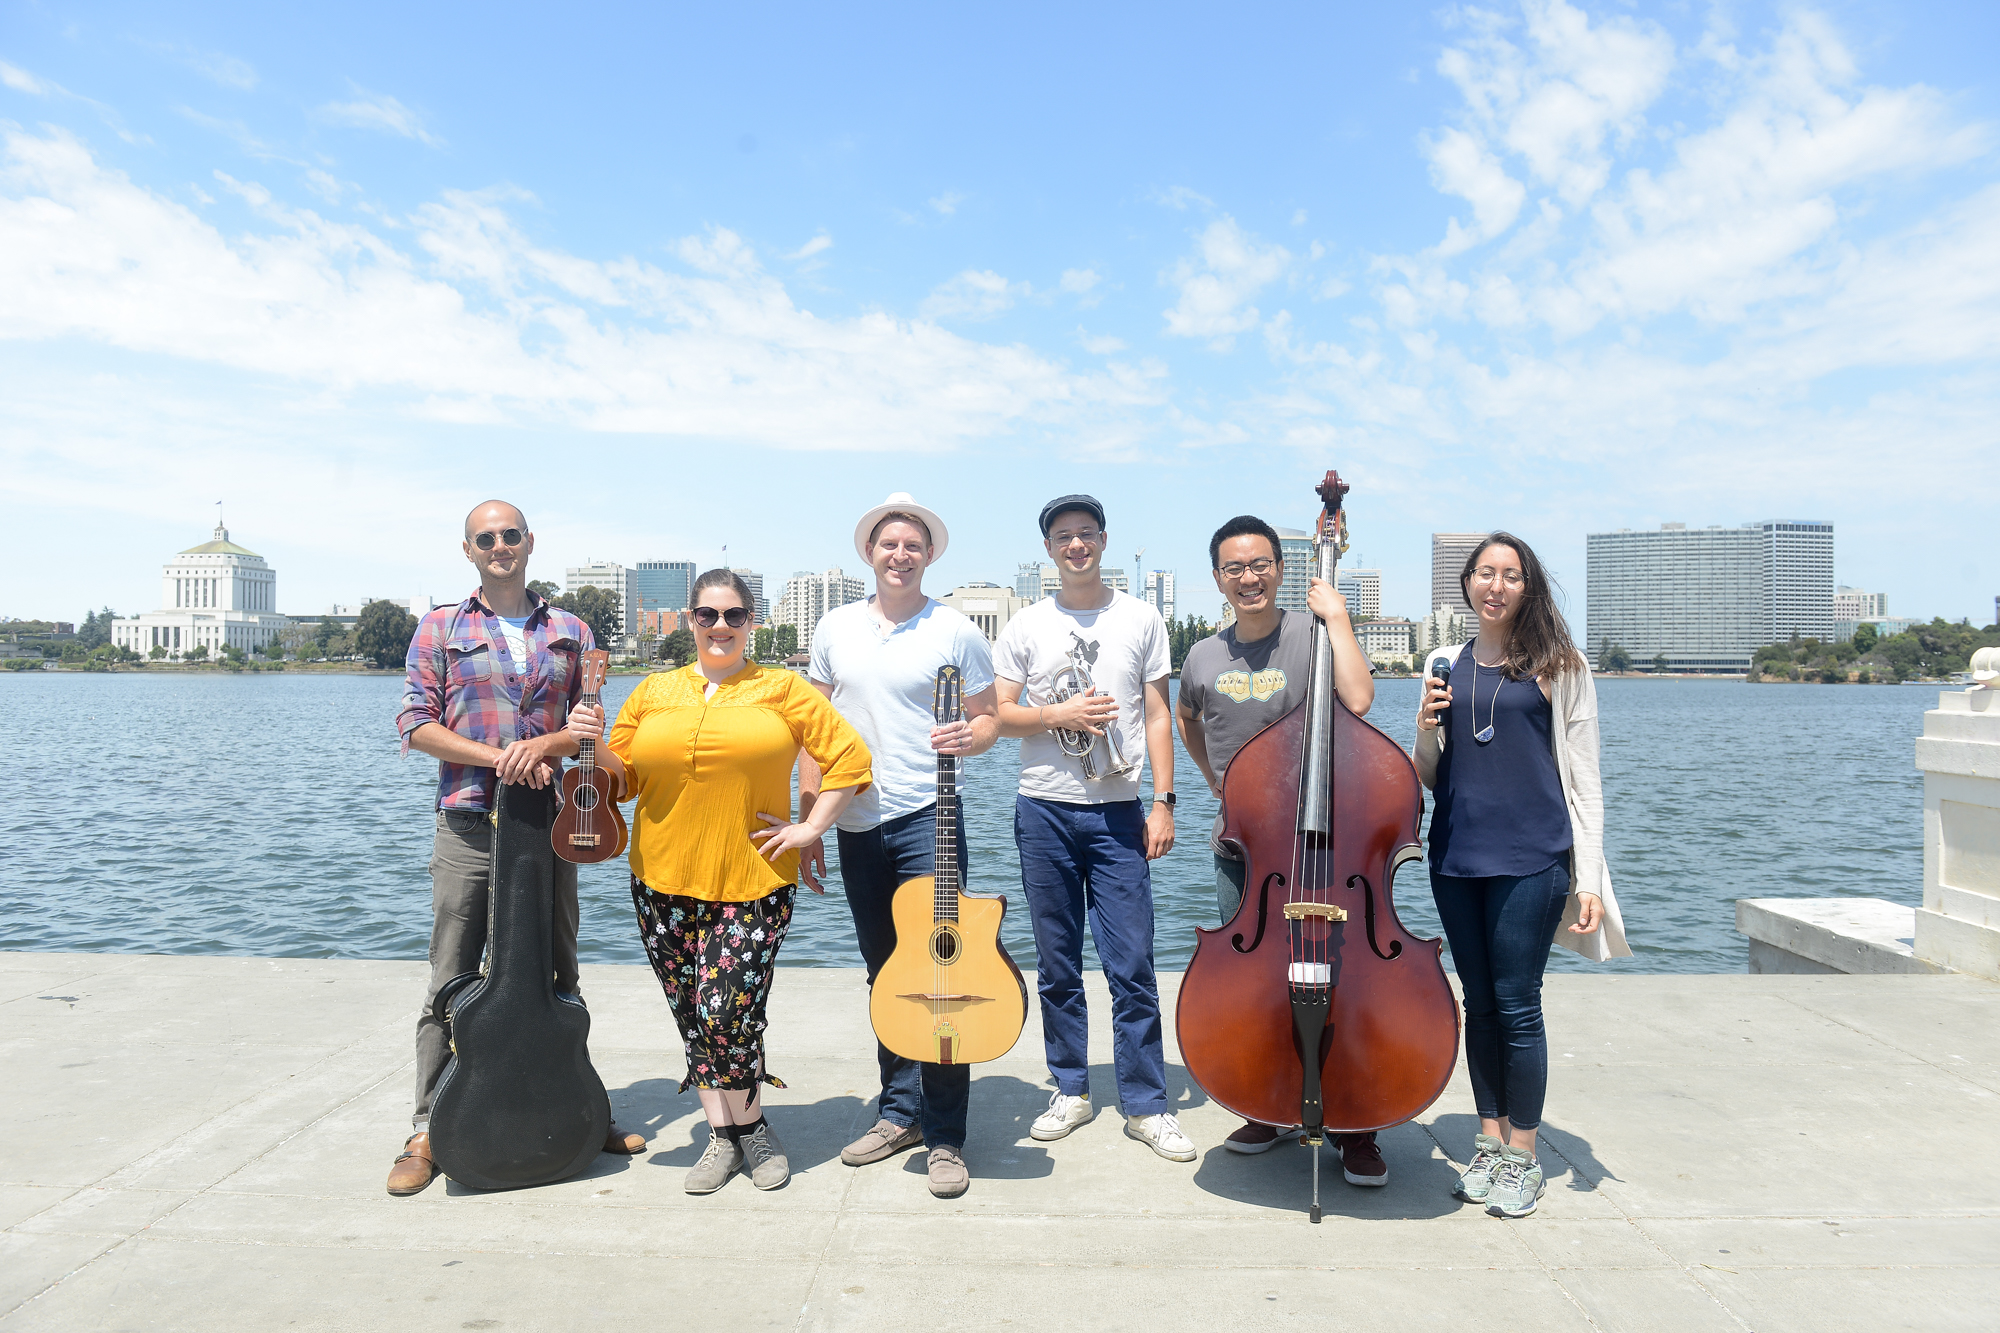 Oakland Swing! Lindy by the Lake, July 21, 2018, COMMUNITY